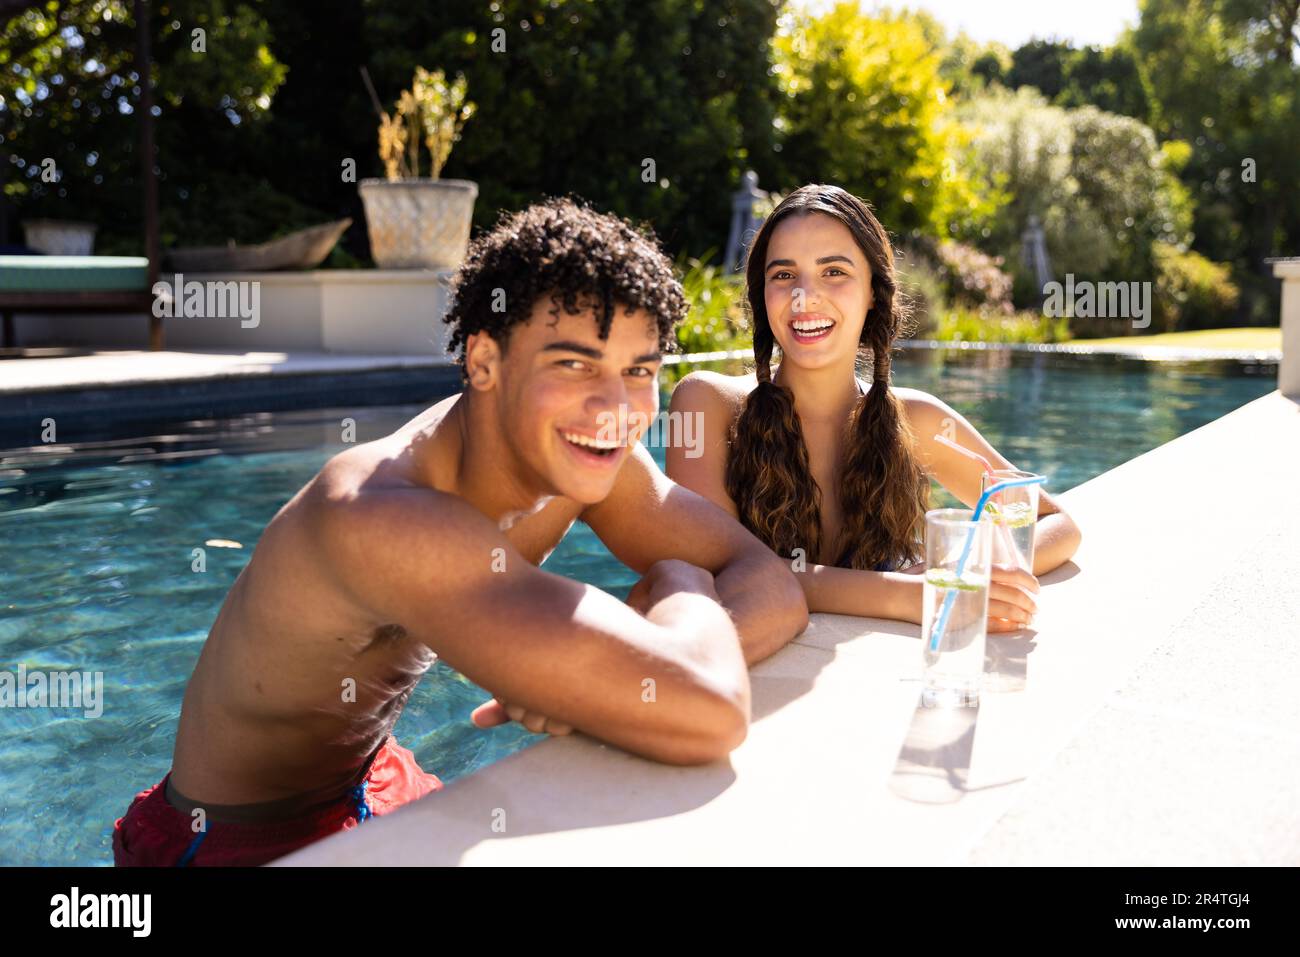 Portrait of cheerful biracial young couple holding drinks while standing in swimming pool Stock Photo